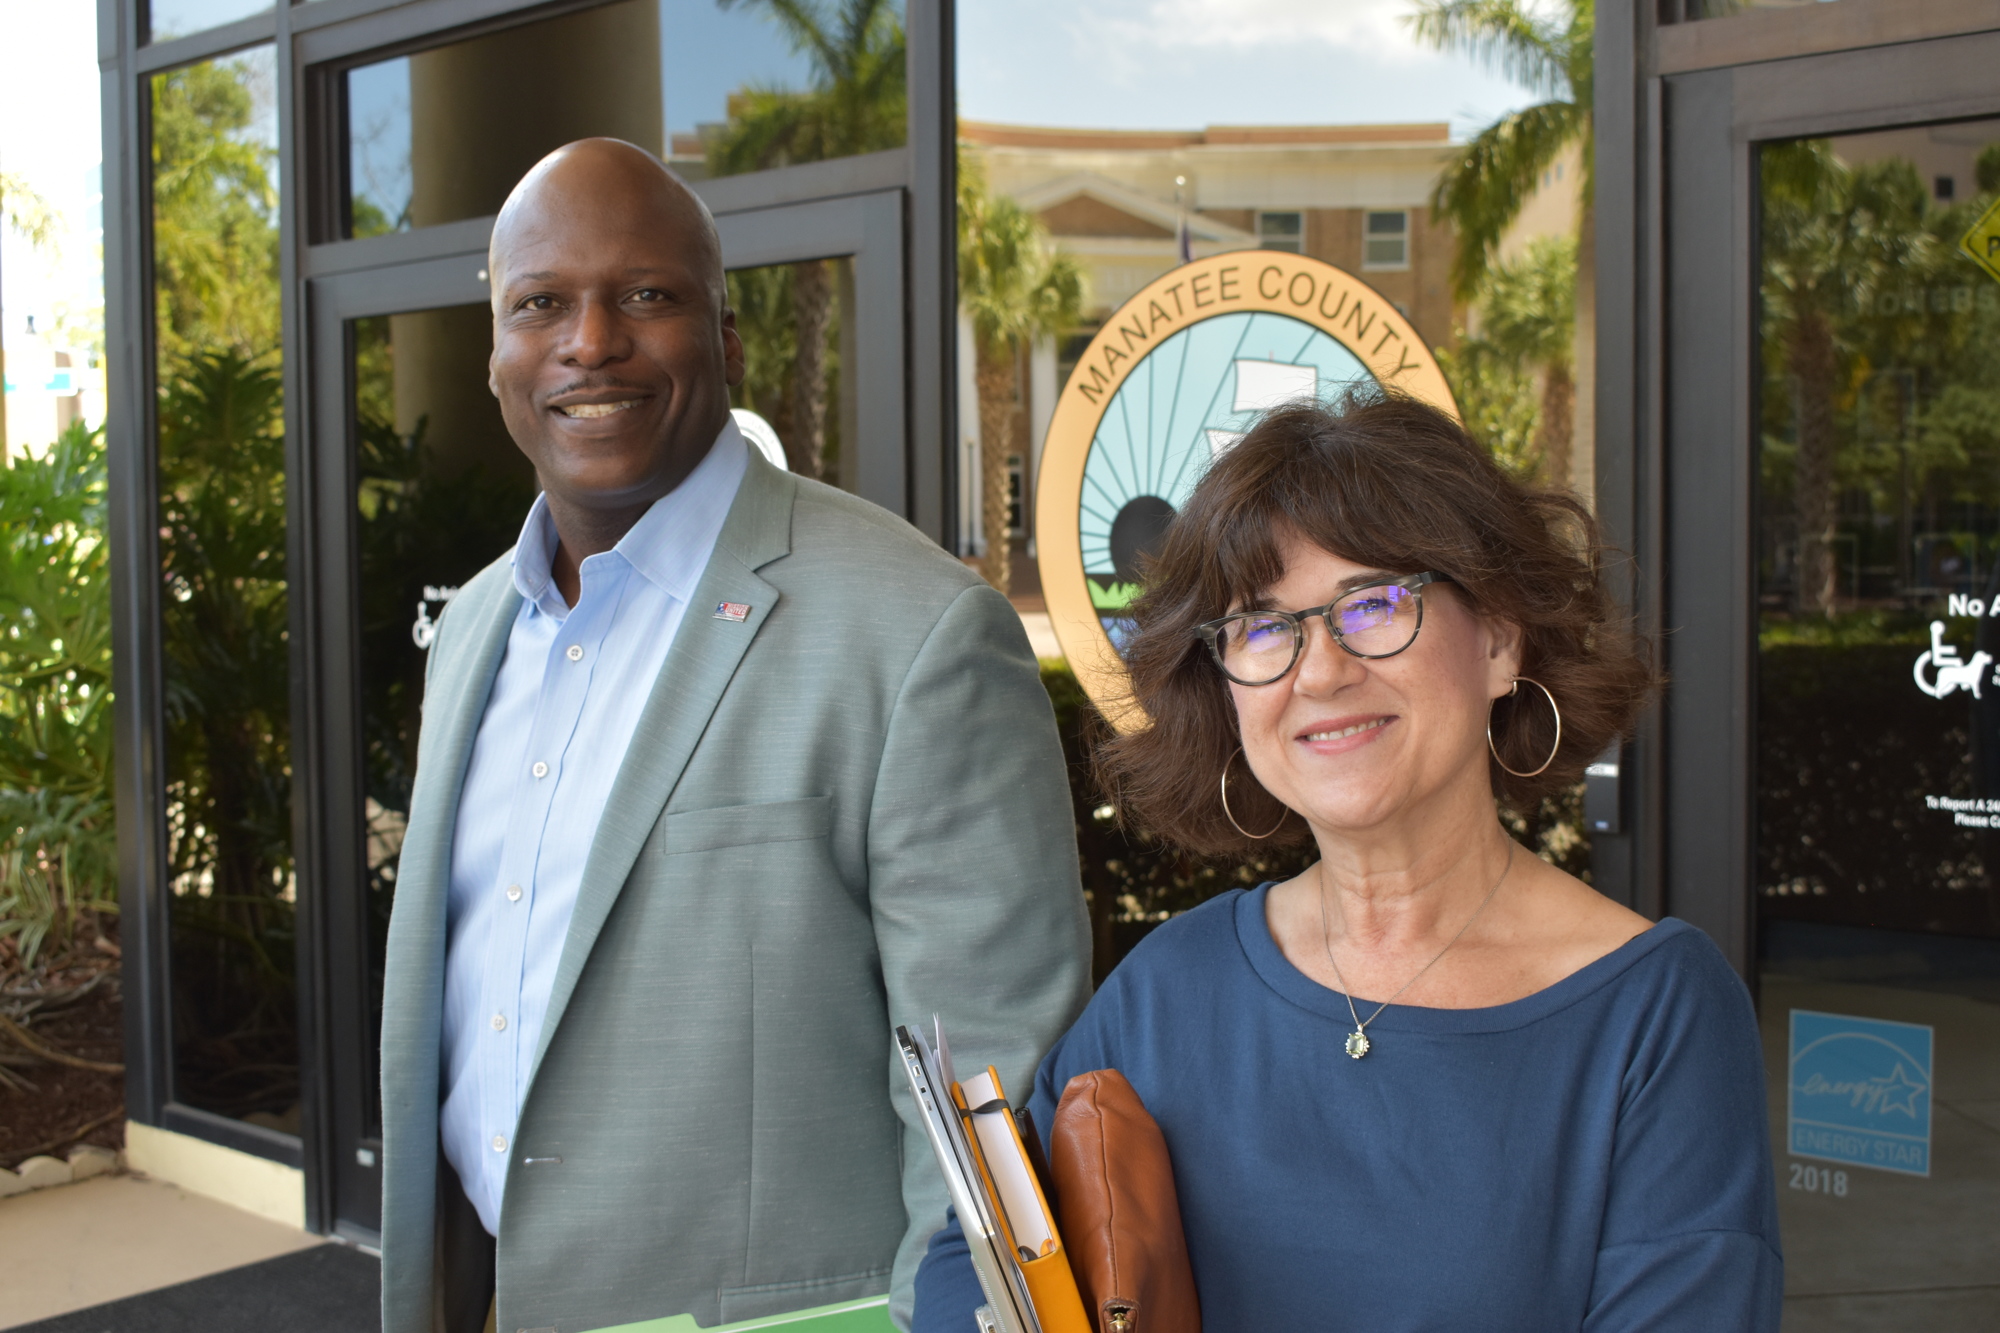 Lee Washington, director of Community and Veteran Services, and Tammy Parrot, Library Services manager,both attended the meeting and said they are glad the library has been named so that planning can proceed.